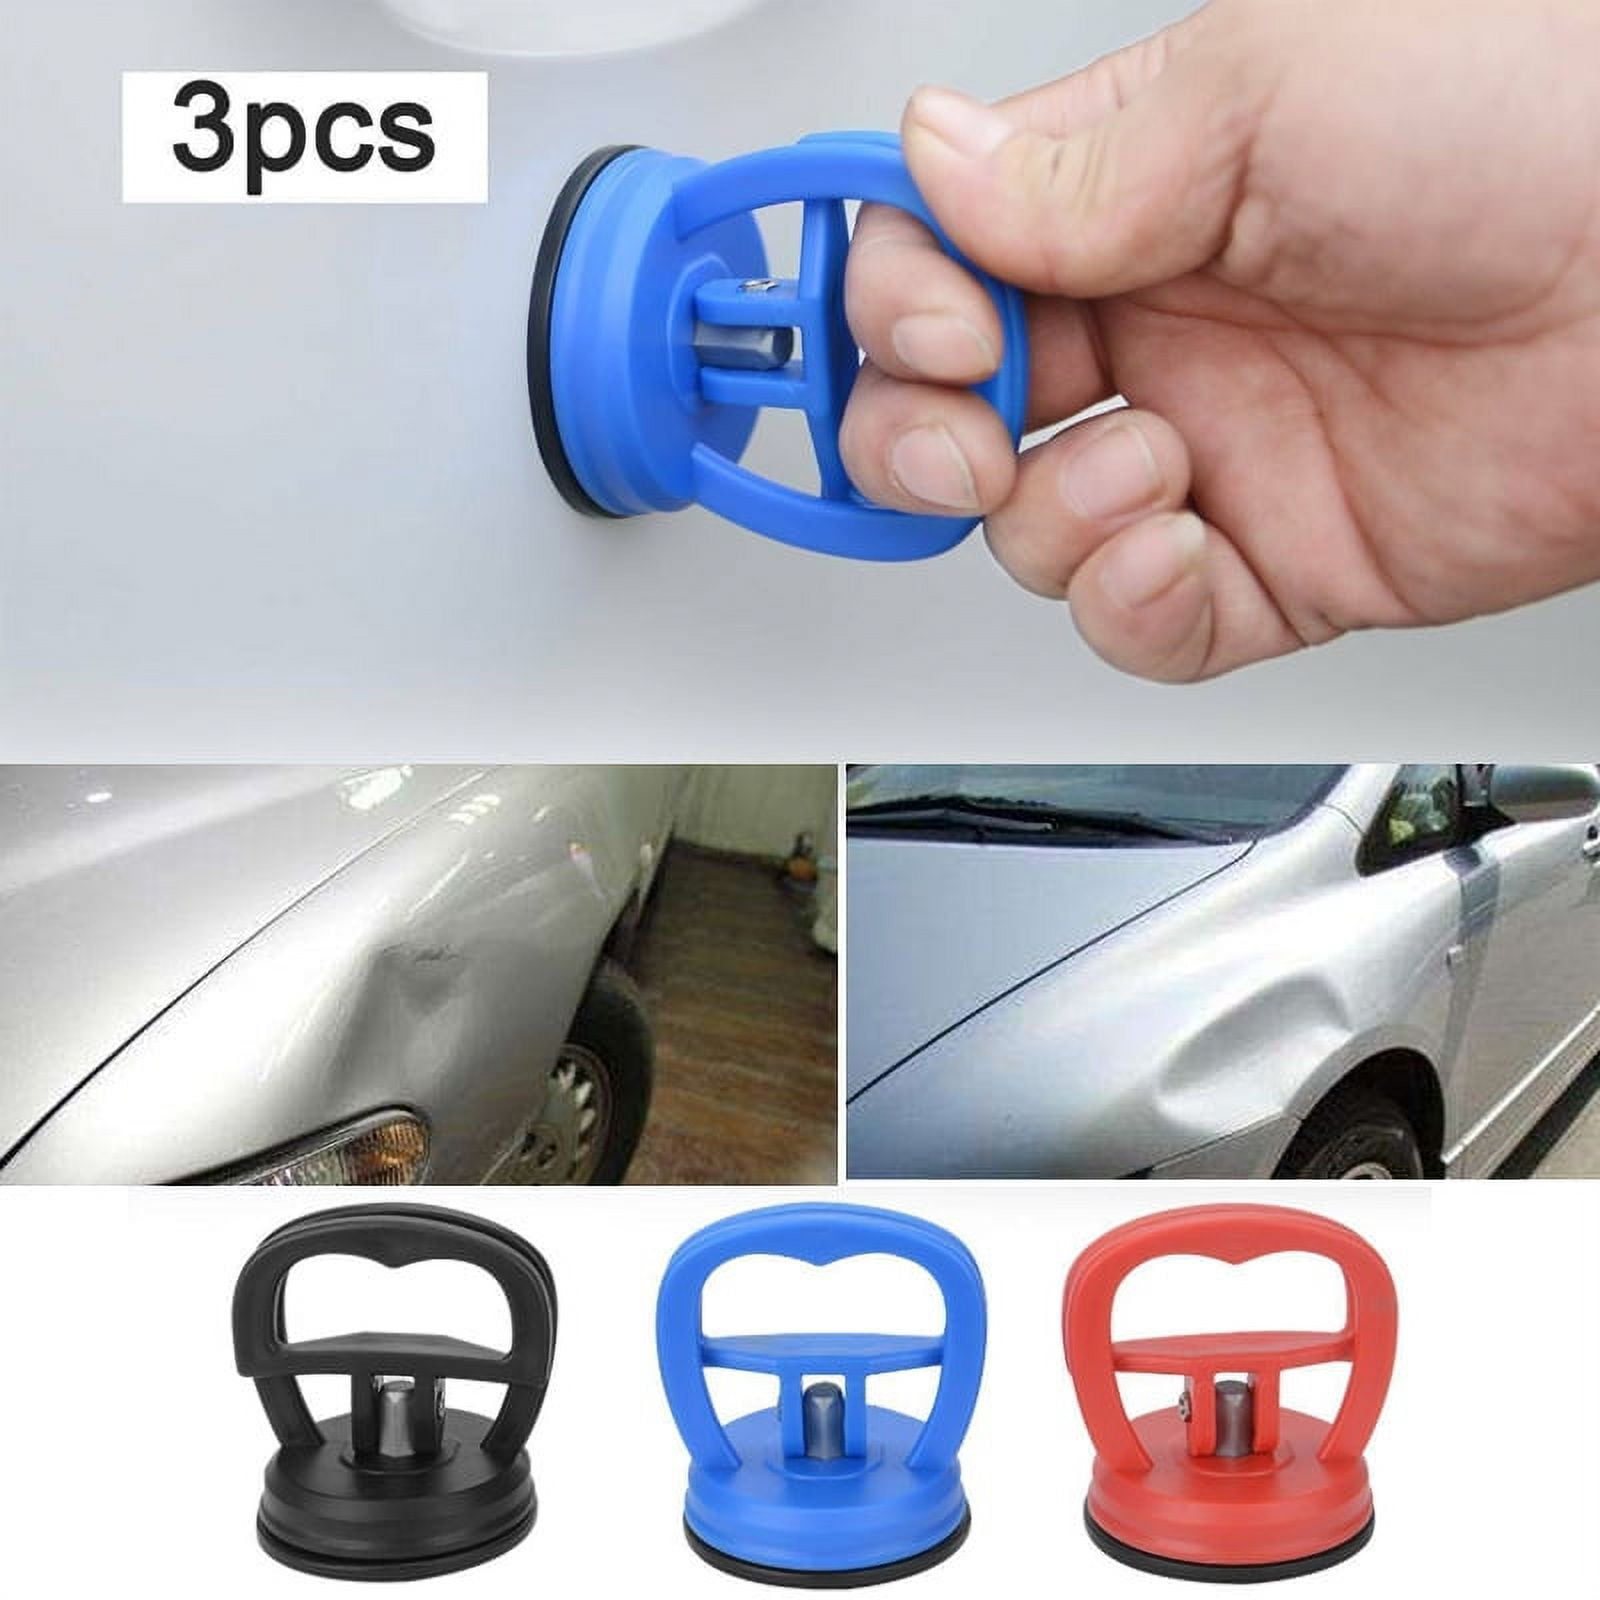 Dent Pullers Love Dock 3pcs Mini Suction Cup Dent Puller Handle Lifter